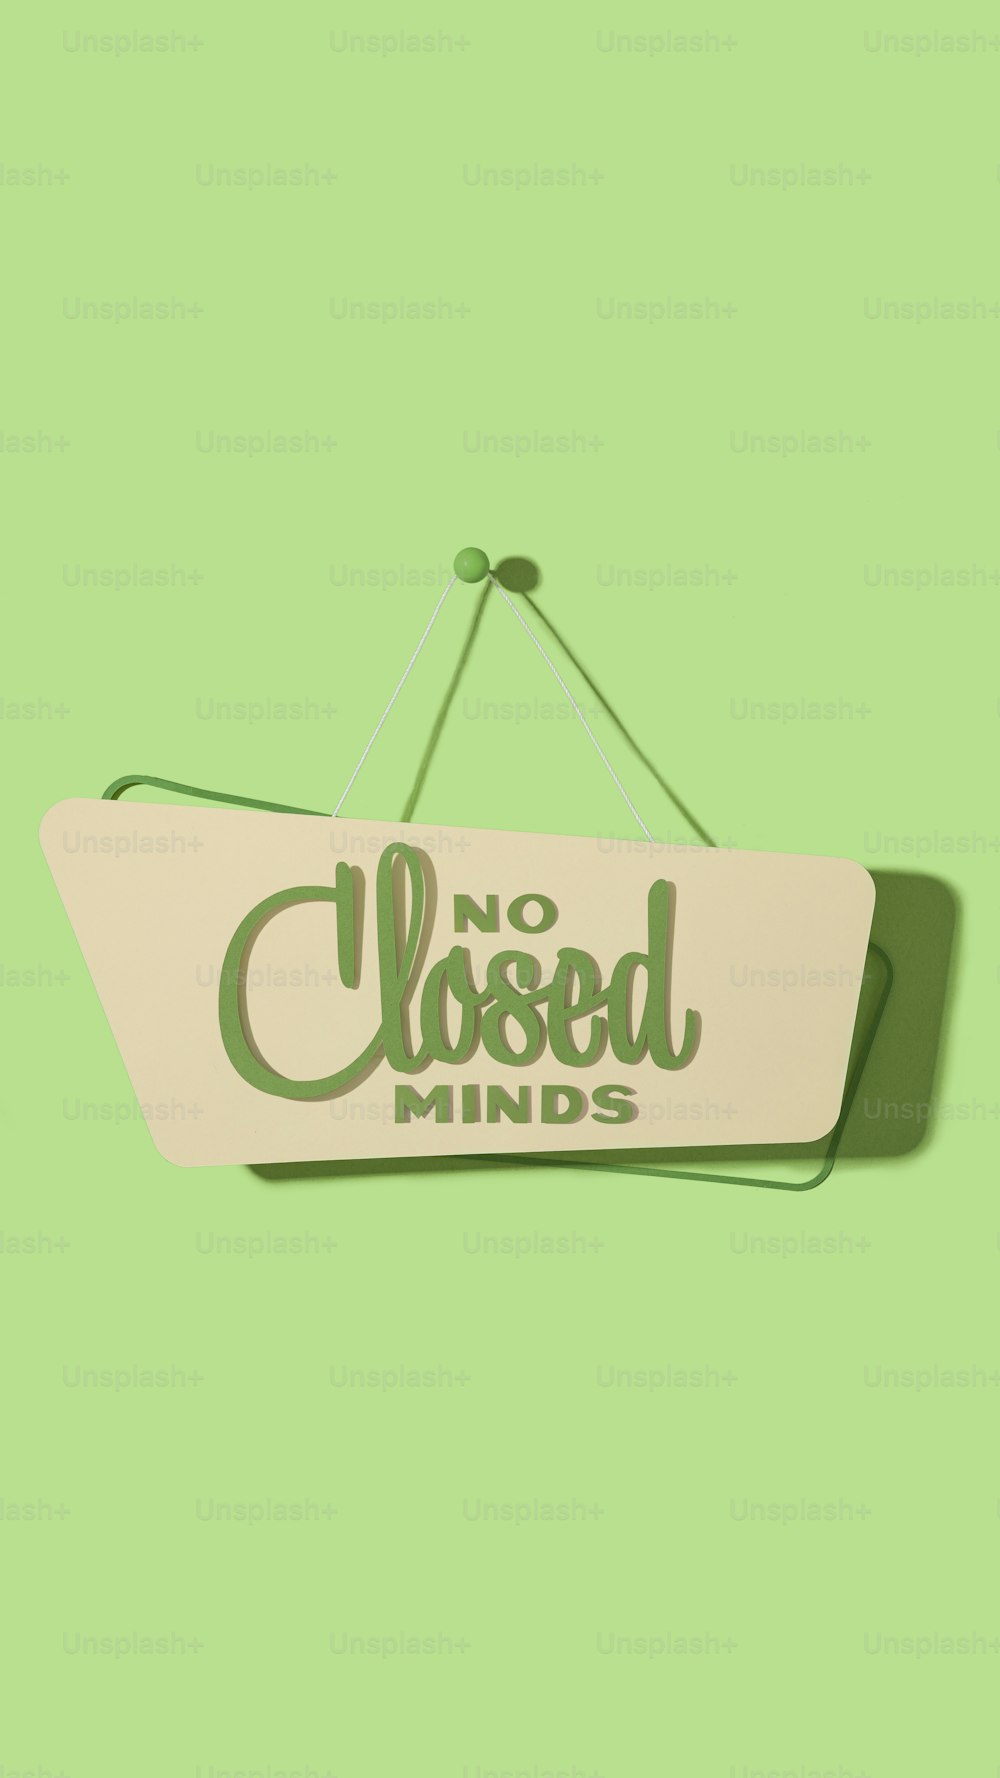 a sign that says no closed minds hanging on a wall